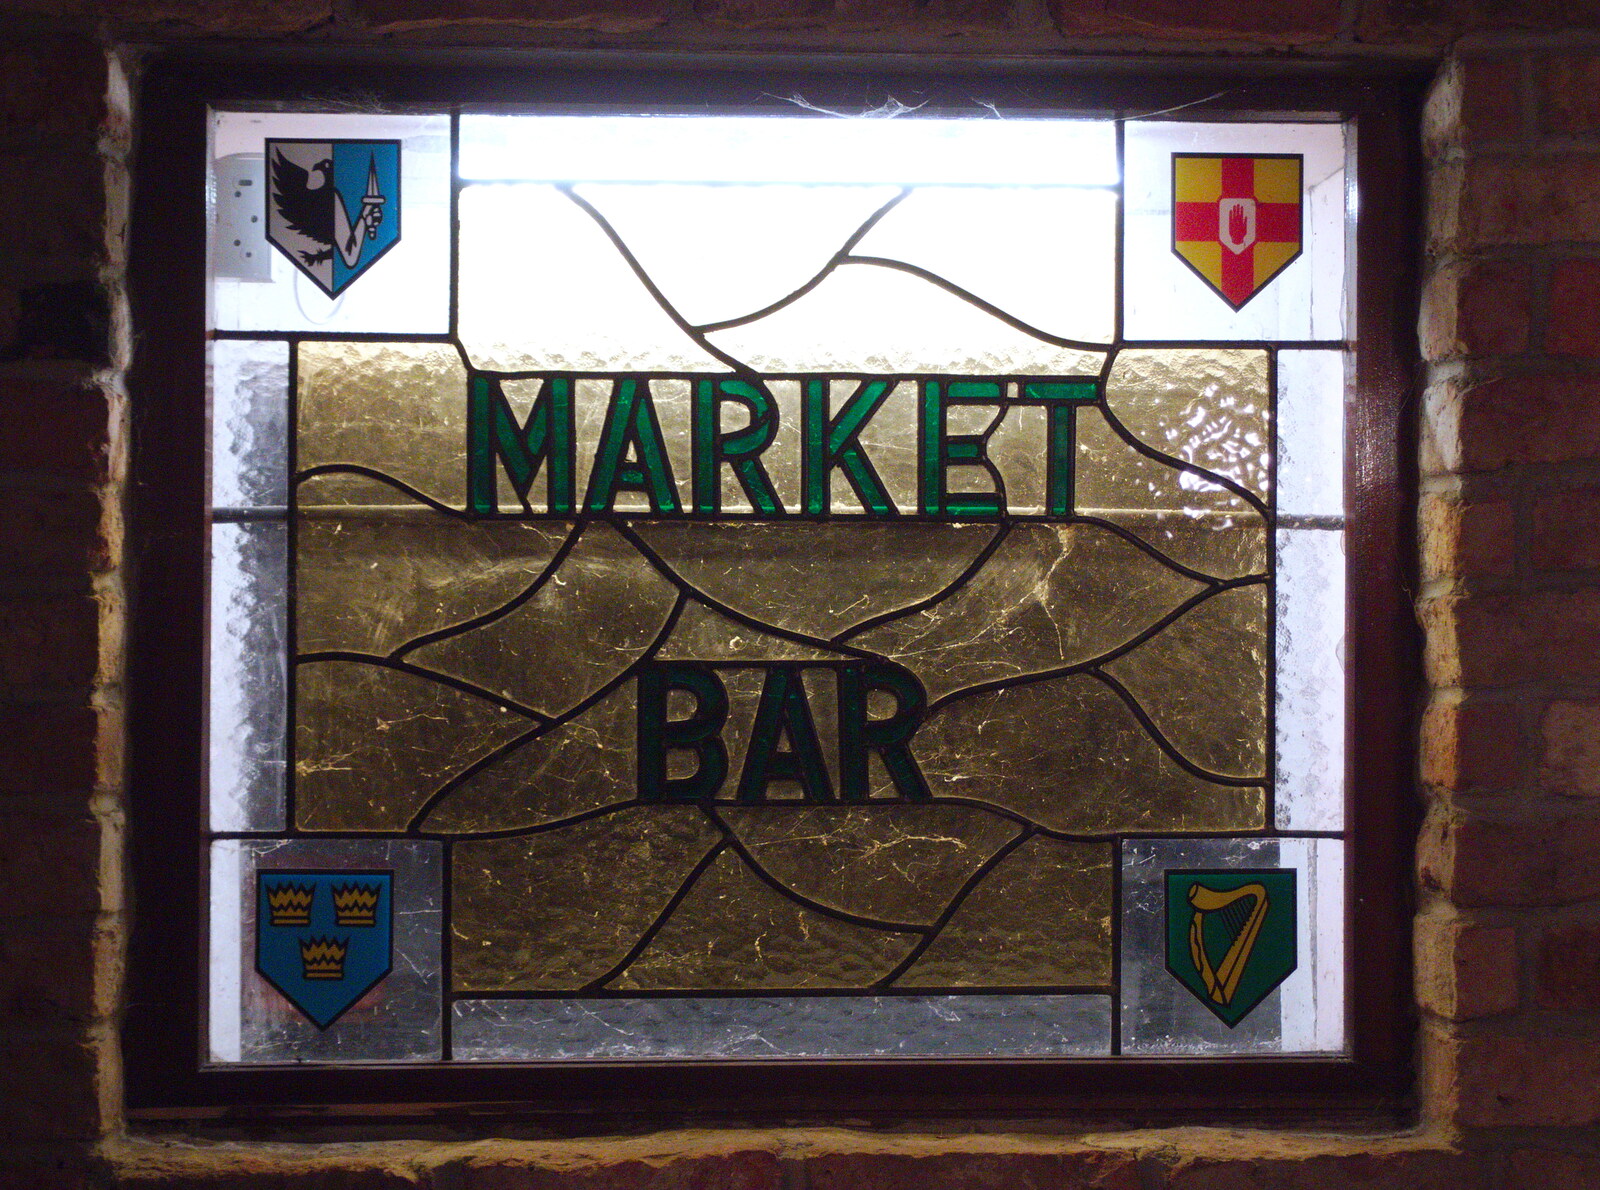 Market Bar's stained glass window from Glencar Waterfall and Parke's Castle, Kilmore, Leitrim, Ireland - 18th August 2019